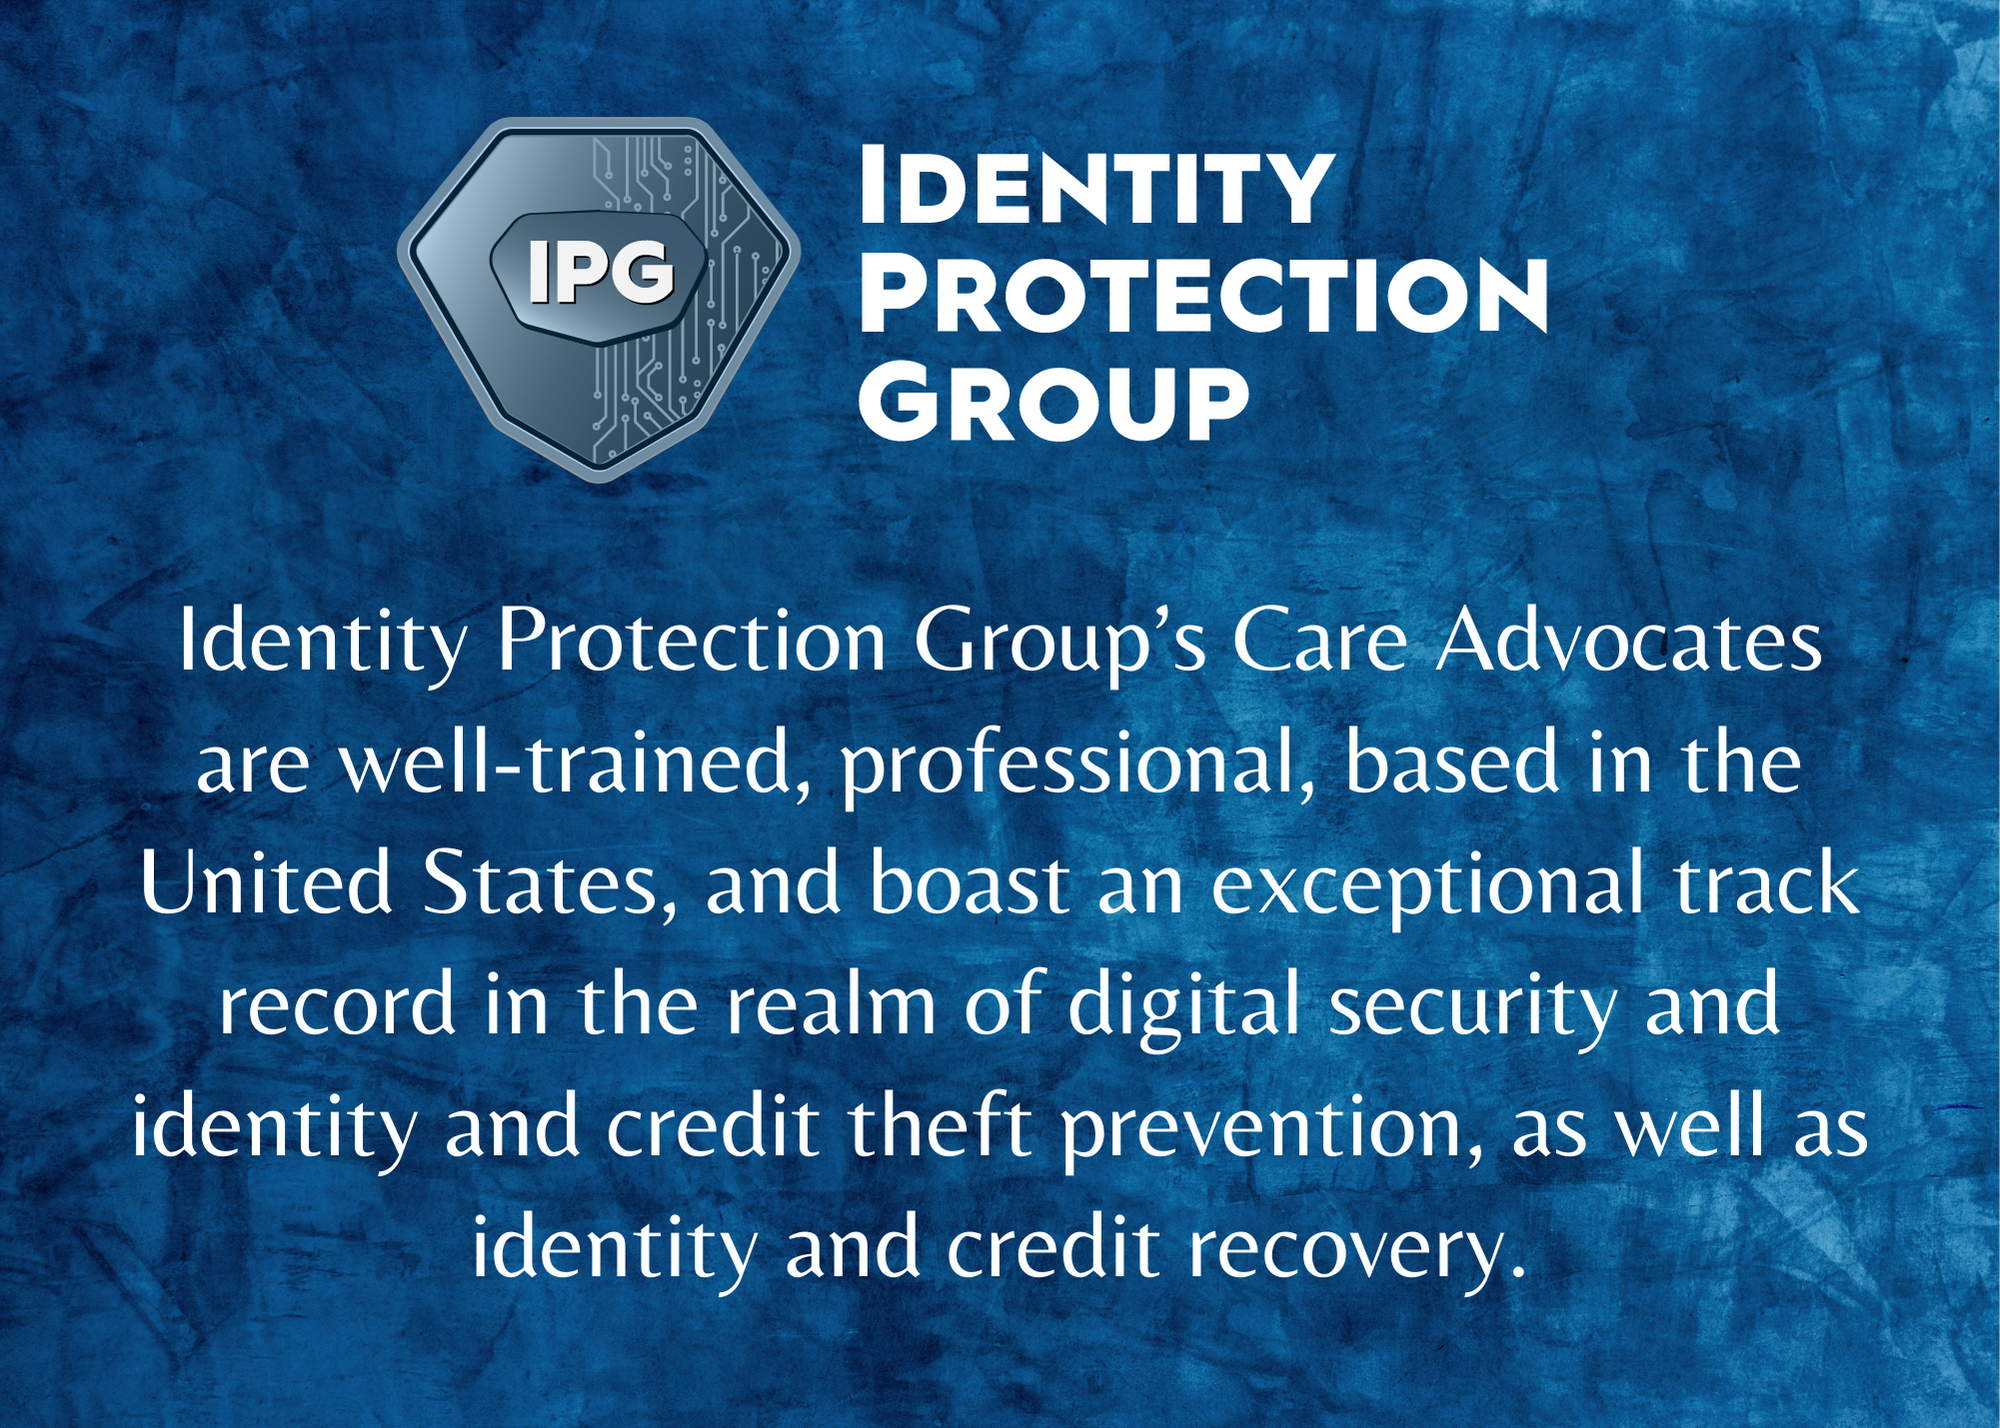 Identity Protection Group, Thursday, April 28, 2022, Press release picture